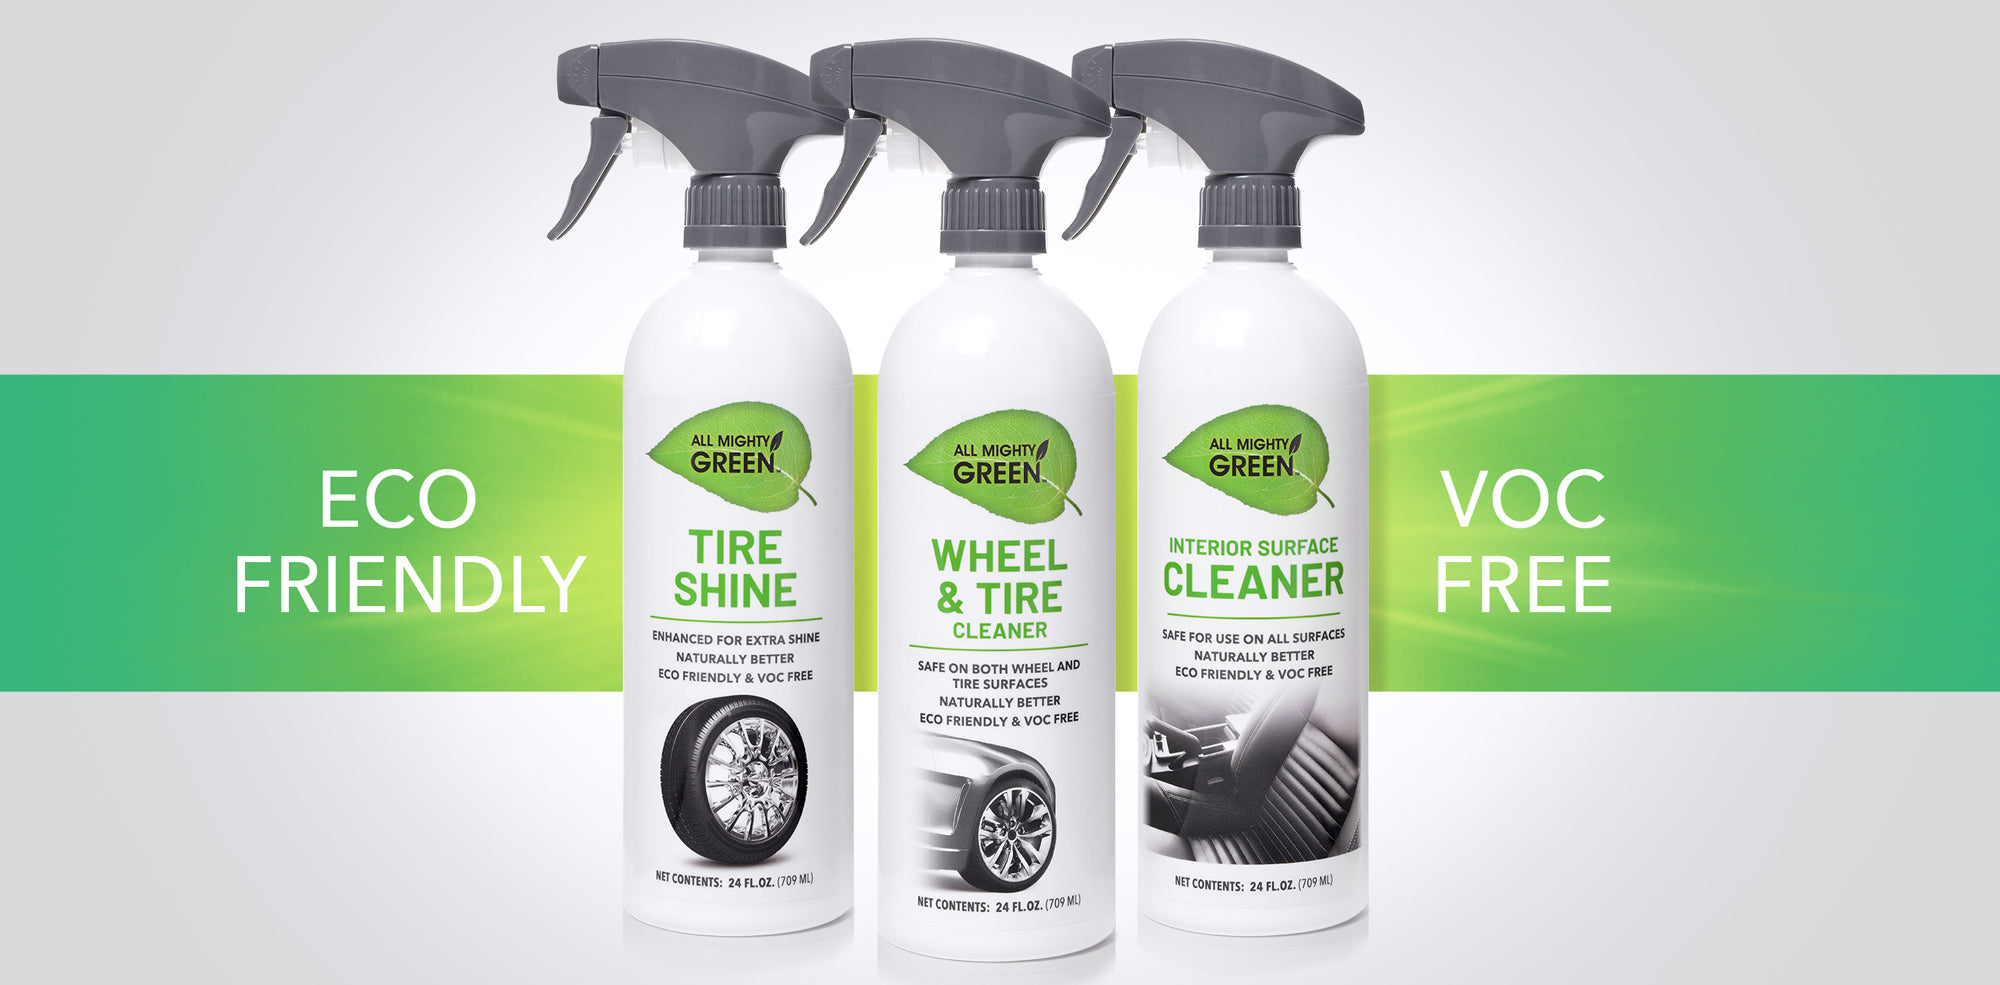 All Mighty Green 24 oz. Automotive Interior Surface CLEANER; Eco-Friendly; VOC Free; Non-Toxic; Trigger Spray Bottle(2-Pack)